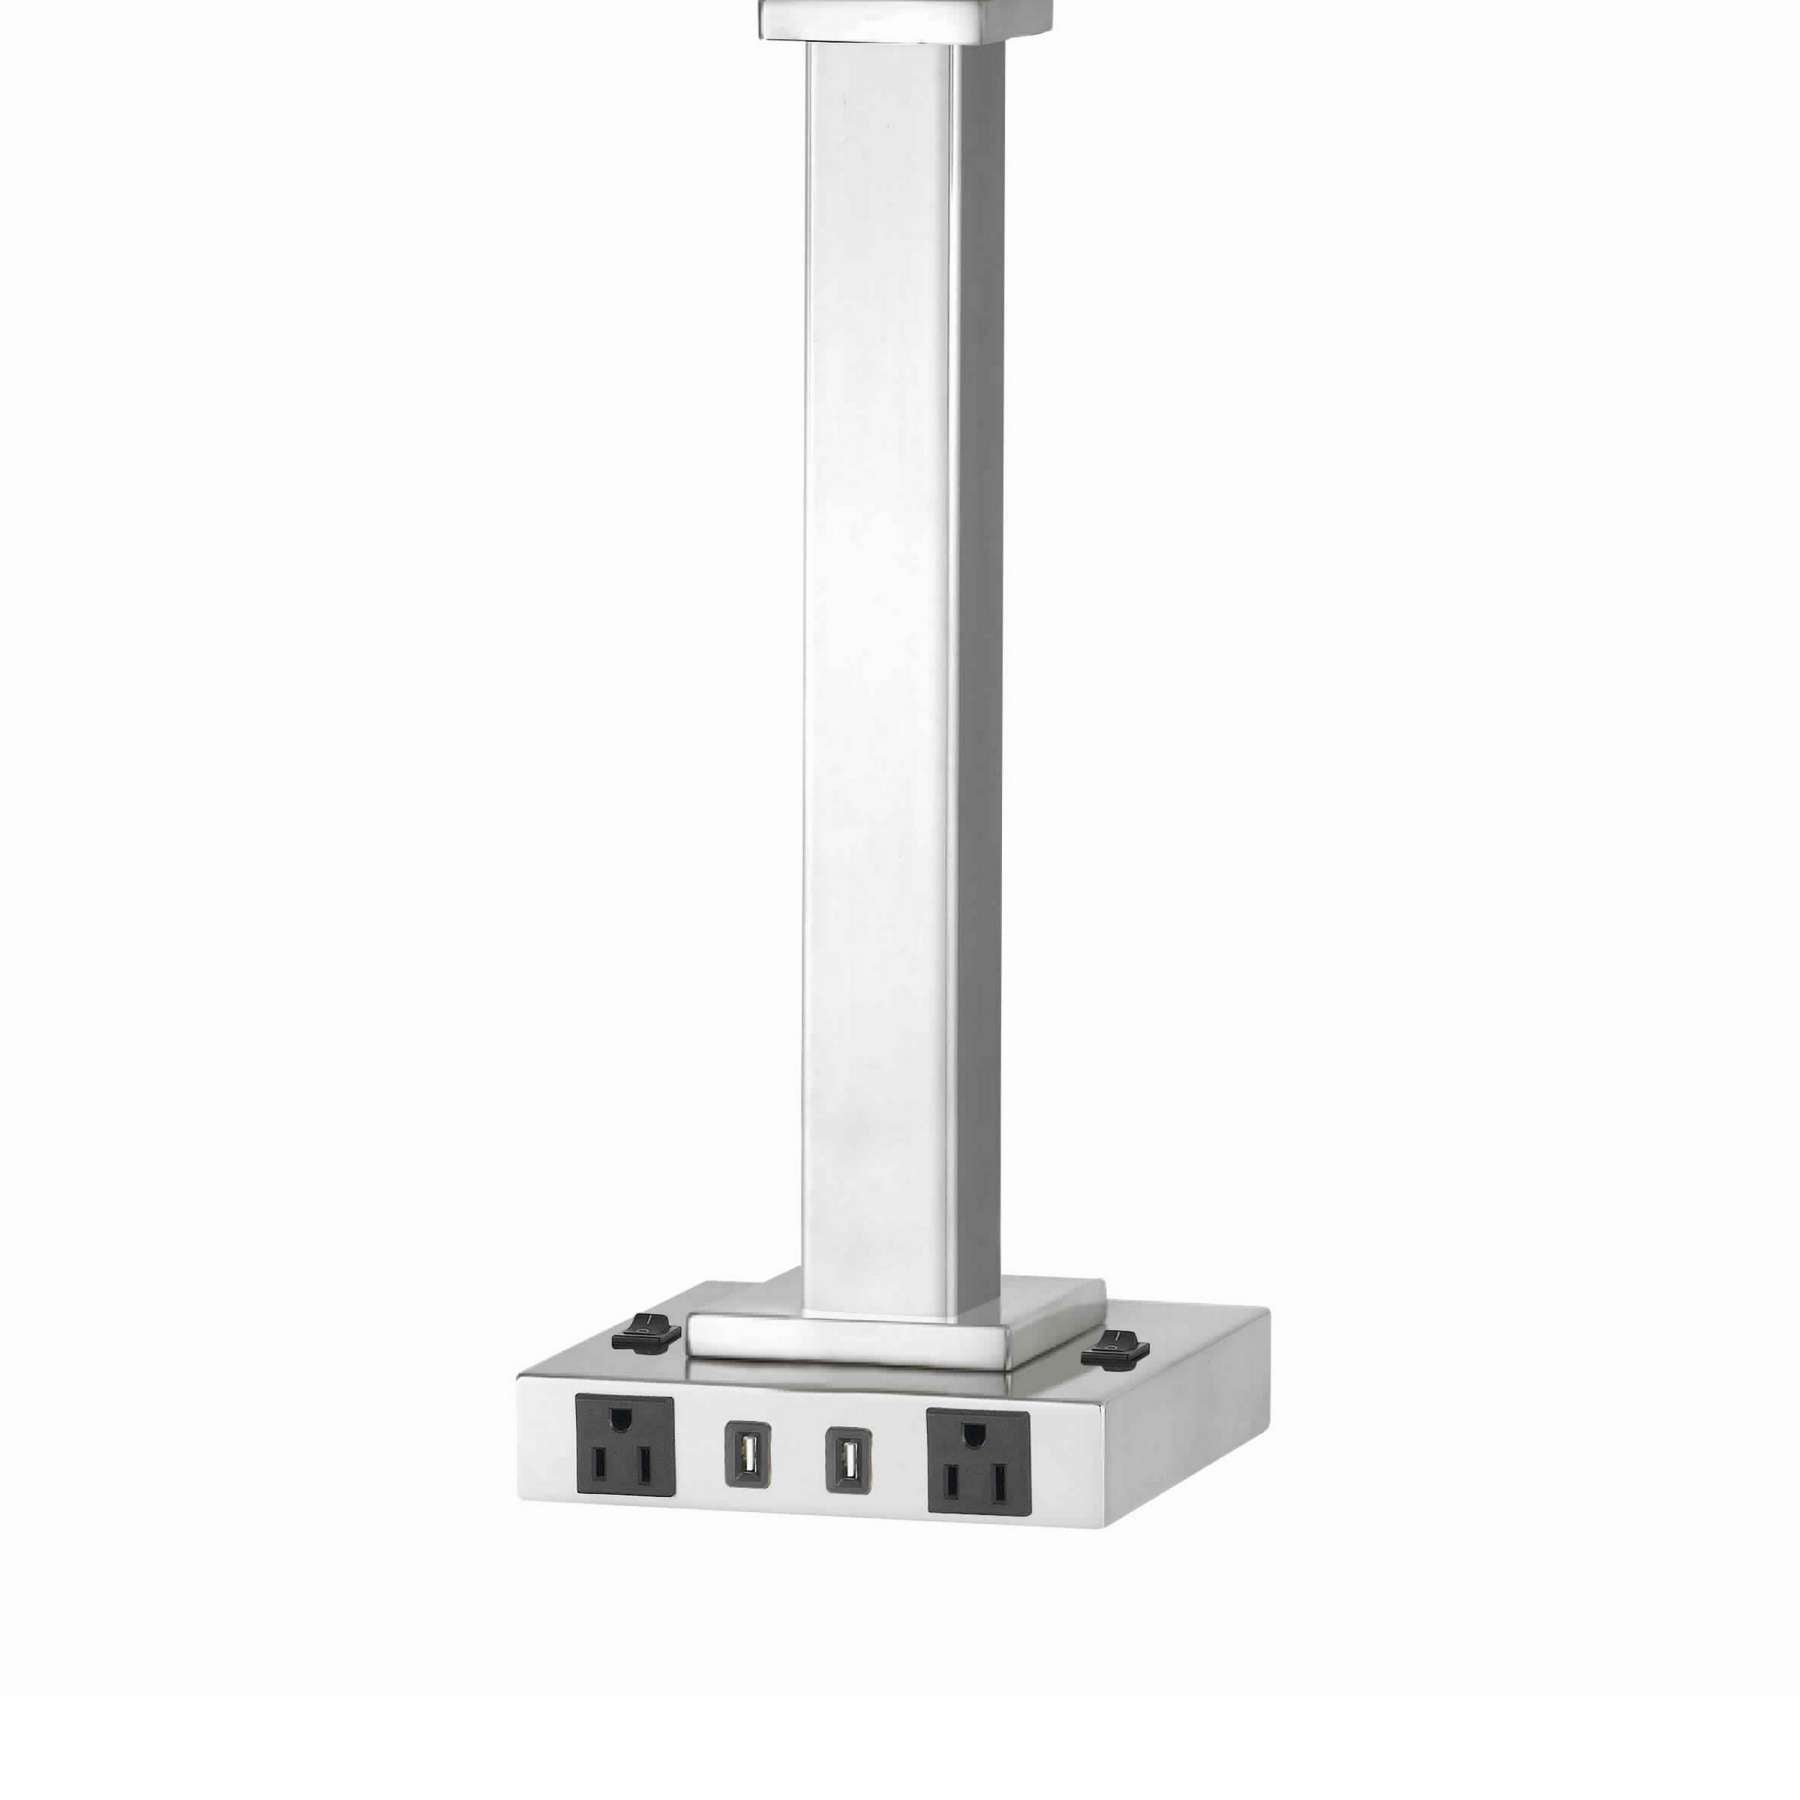 60 X 2 Watt Metal Night Stand Lamp With Tapered Shade, White And Silver By Benzara